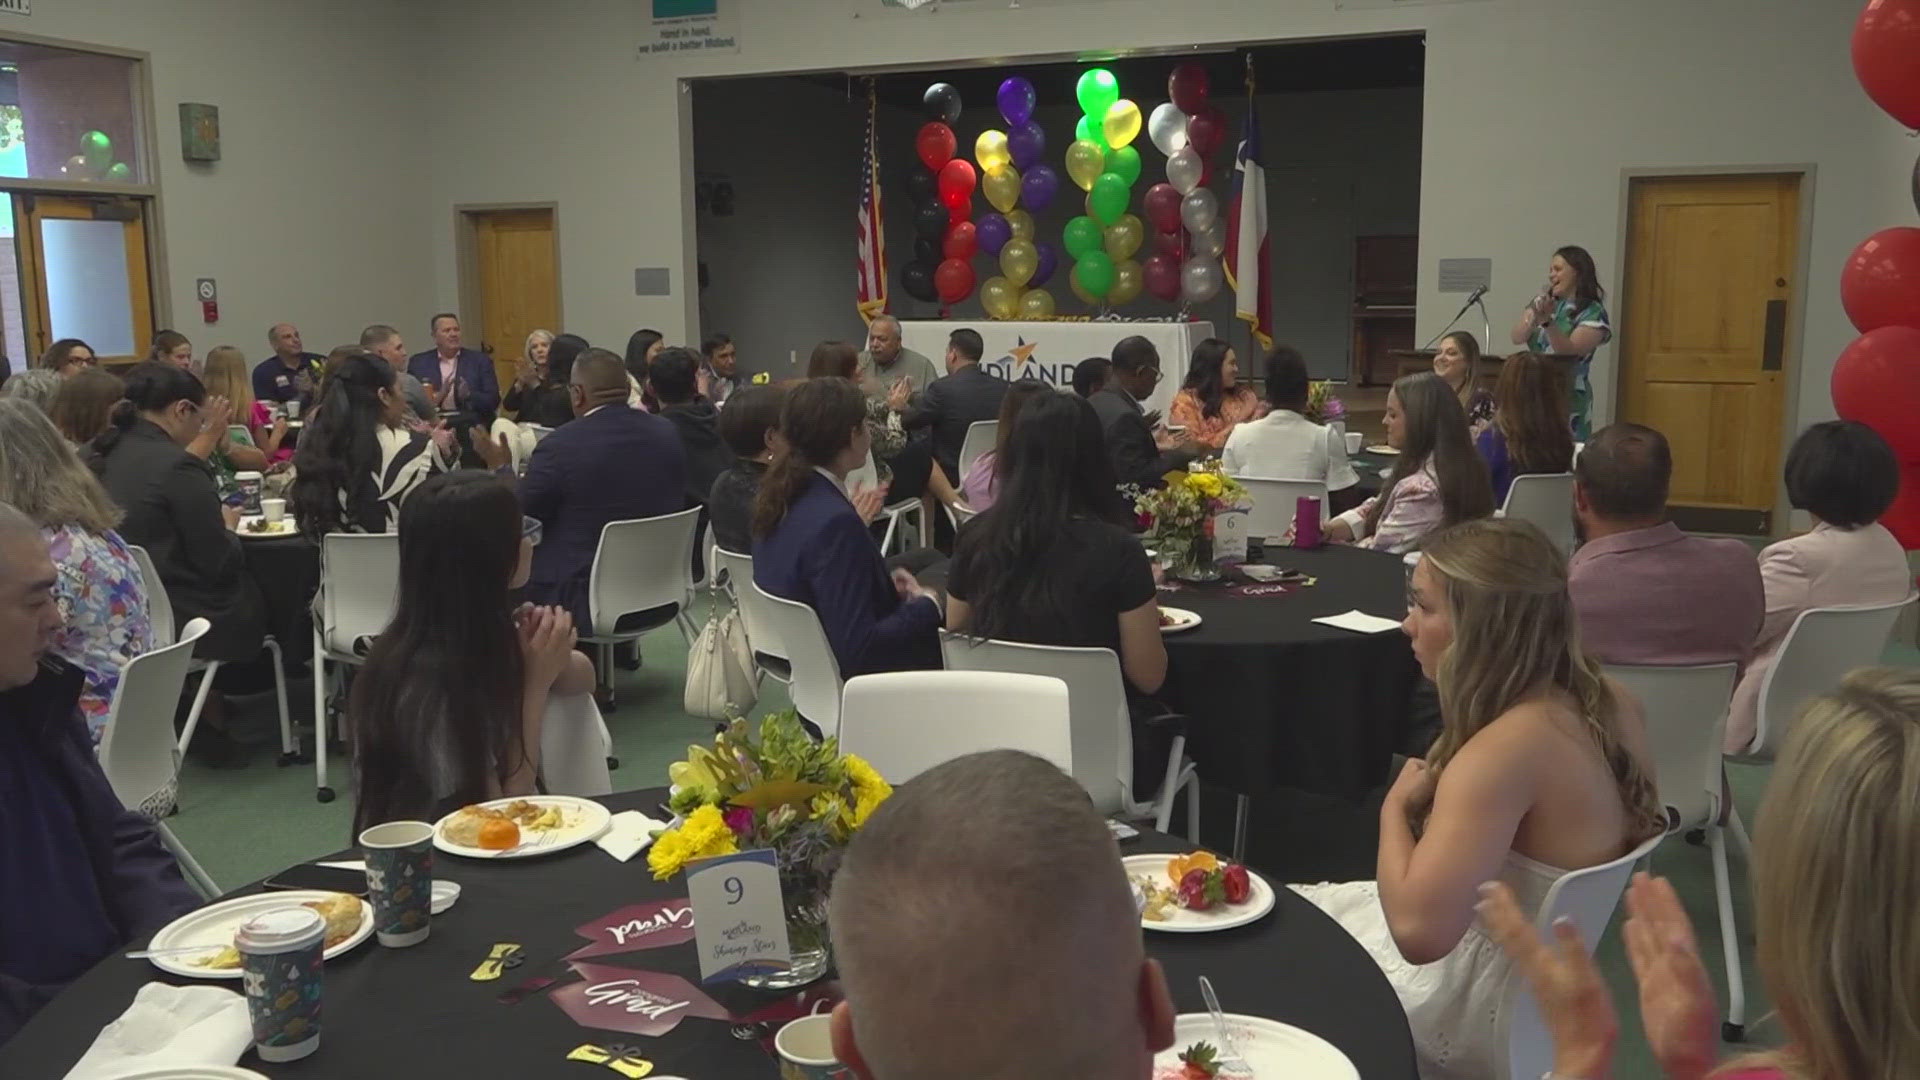 The Midland Education Foundation hosted the event that put a spotlight on the top students from Midland High, Legacy High and others.